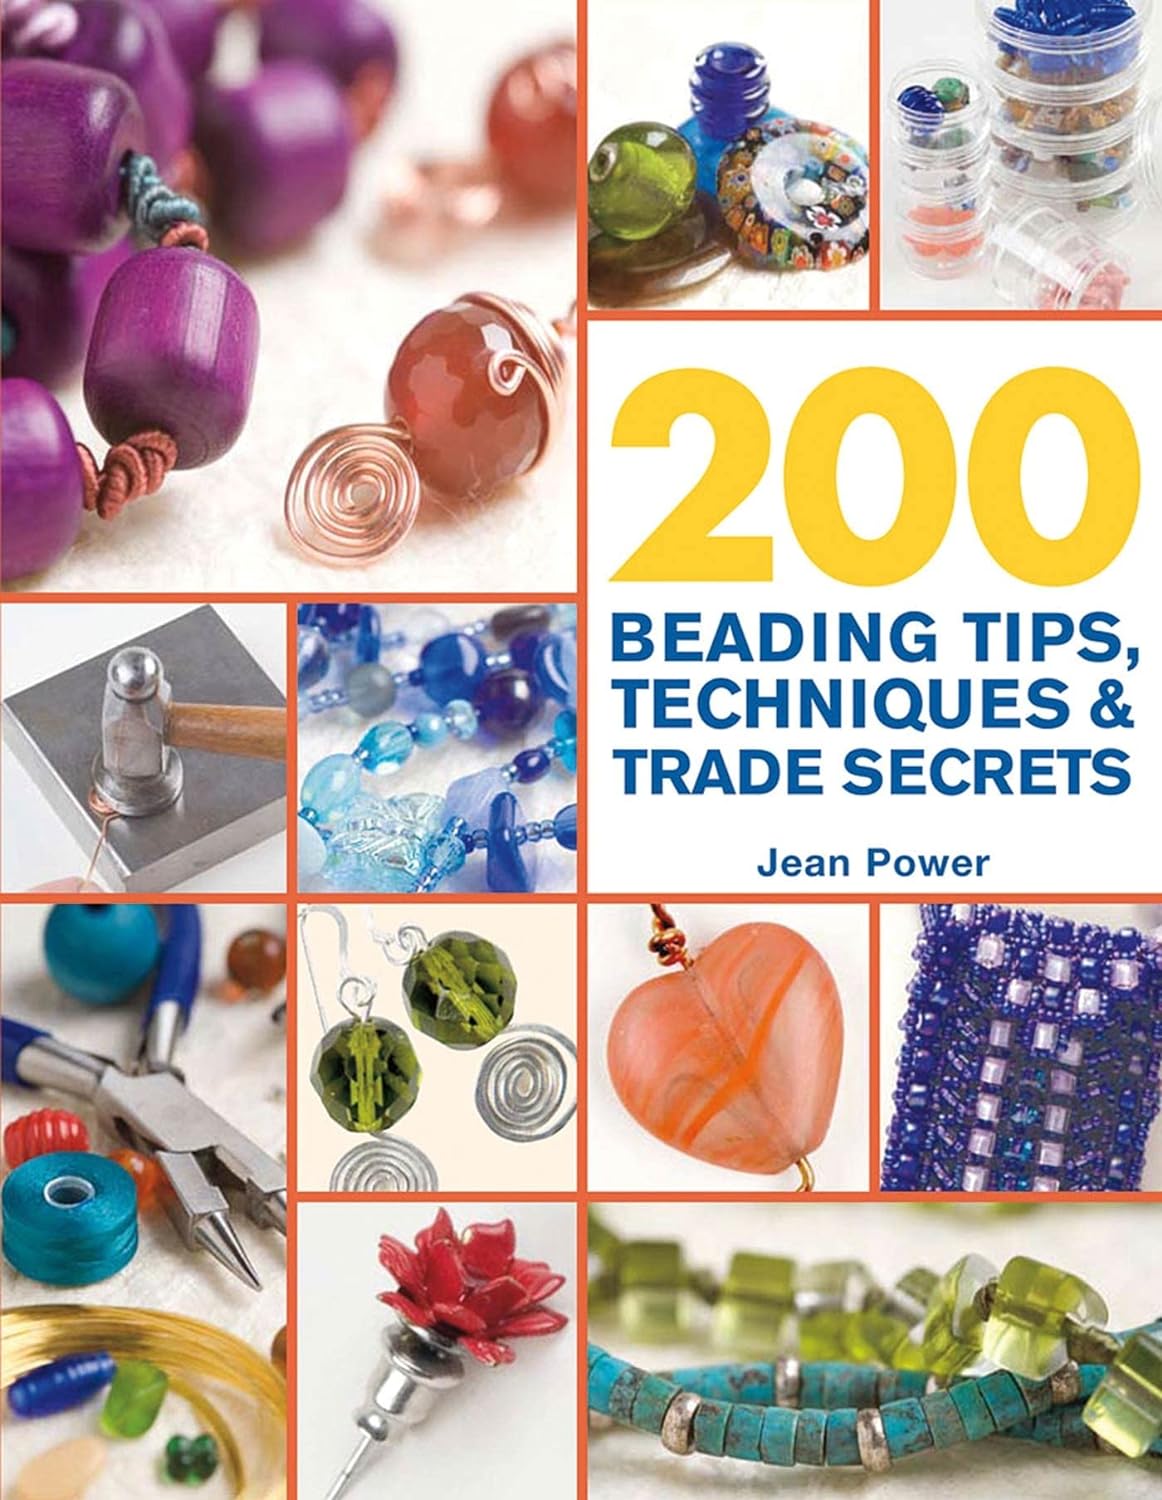 200 Beading Tips, Techniques, & Trade Secrets by Jean Power